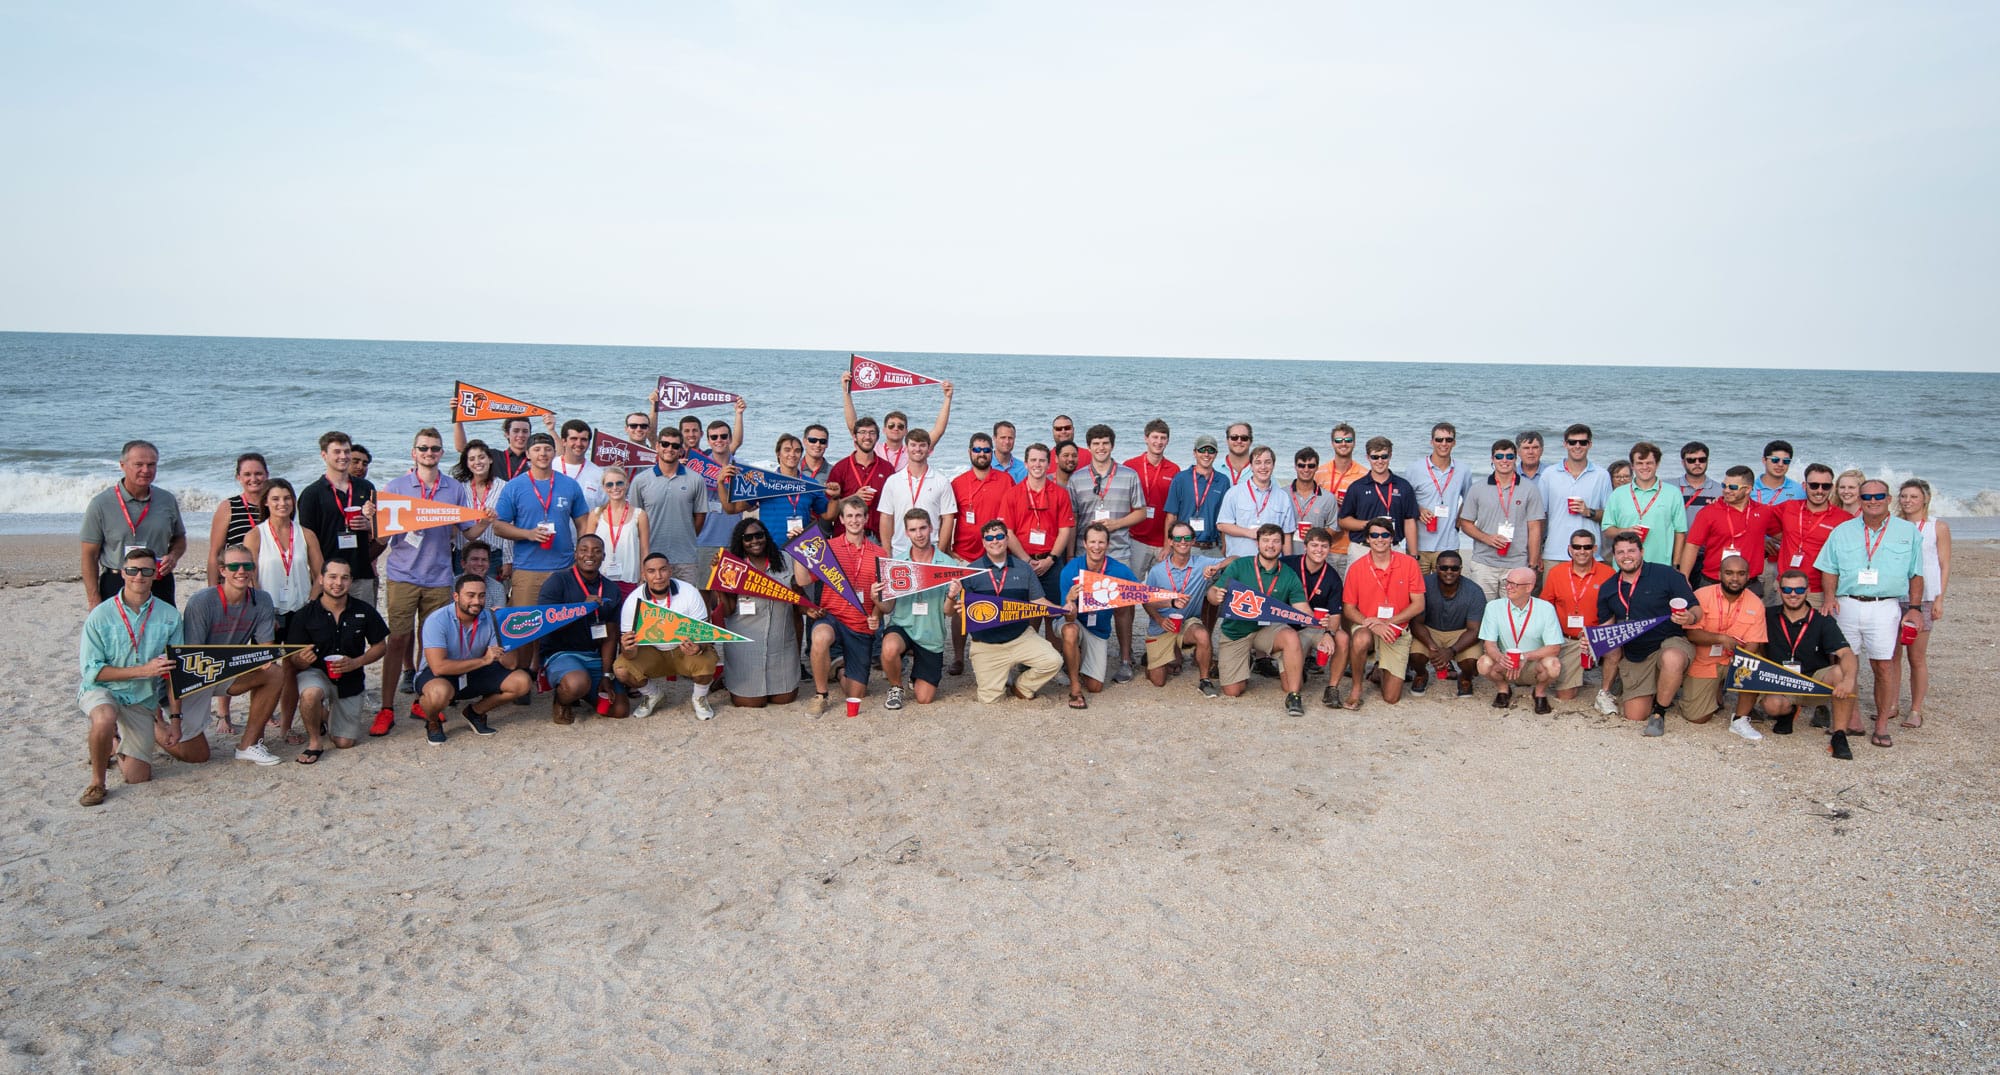 interns and staff at the beach holding college flags